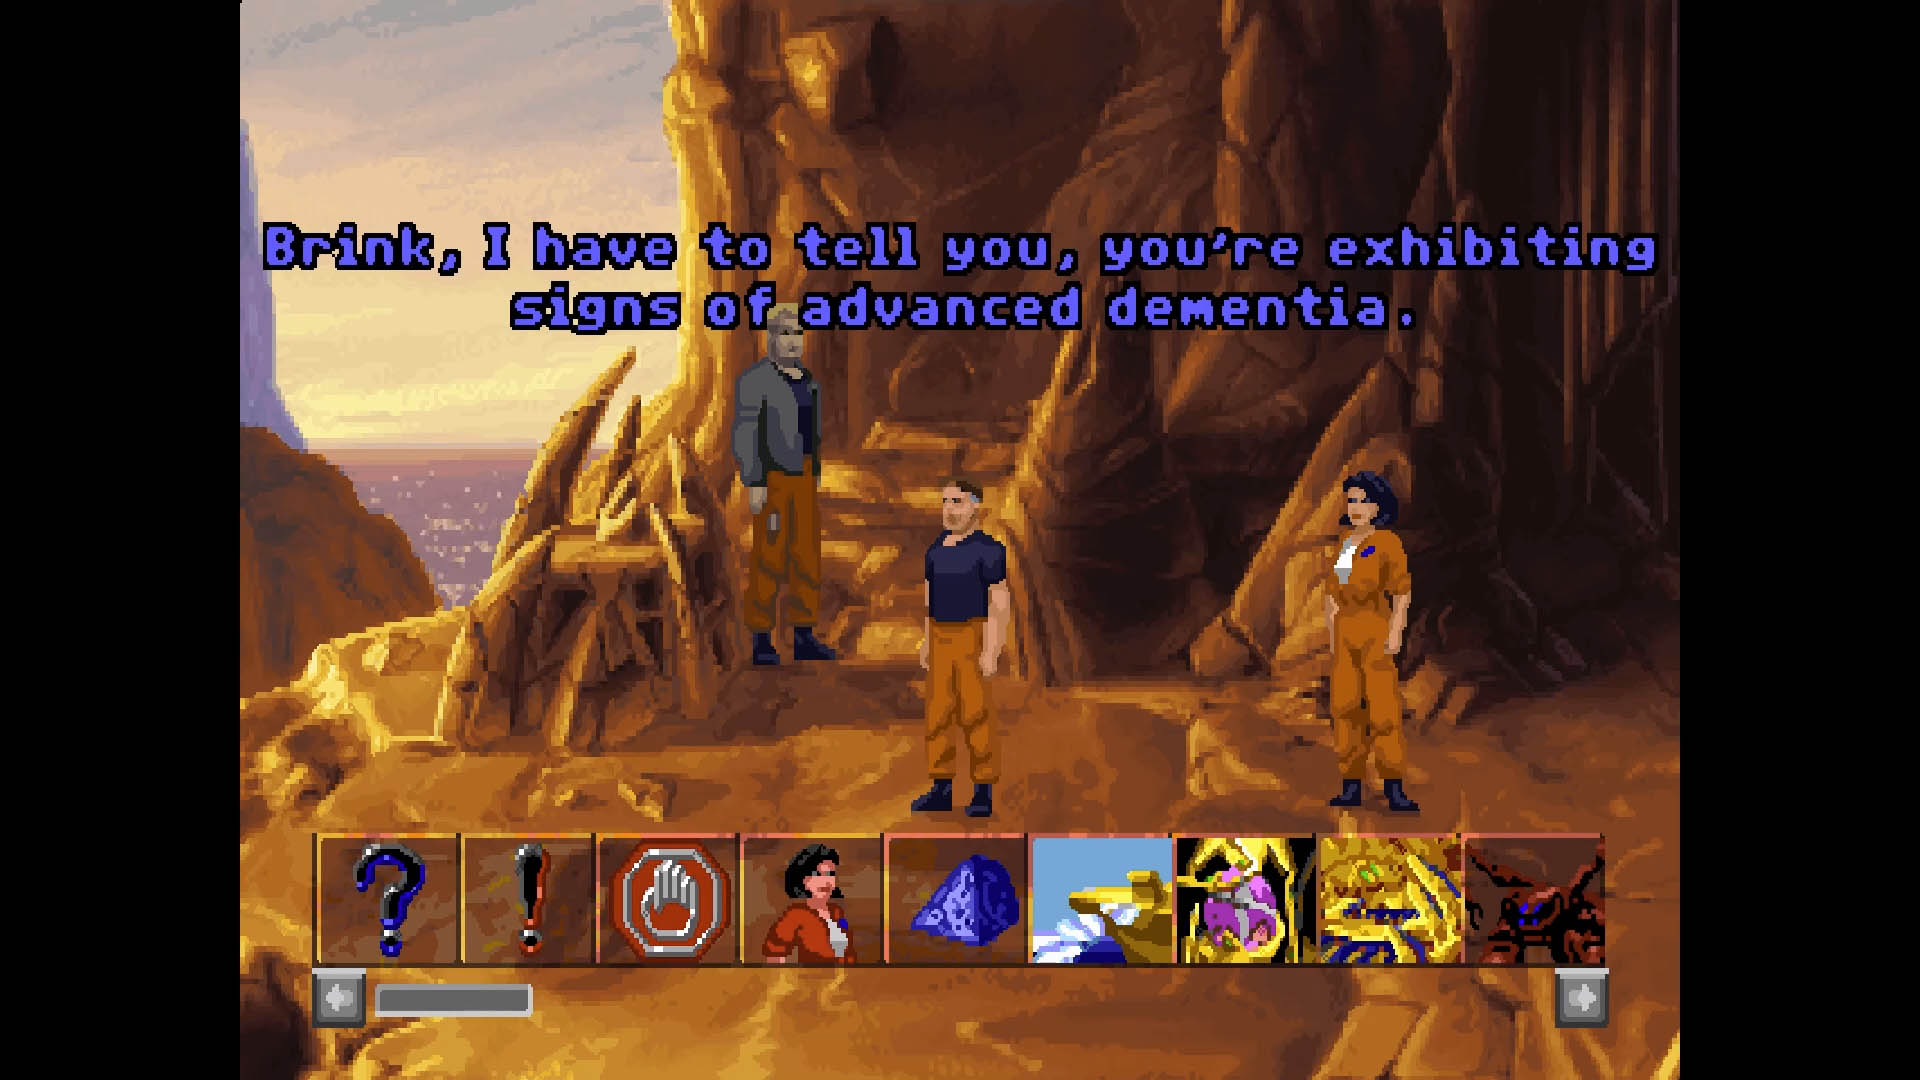 A gameplay screenshot from Dig